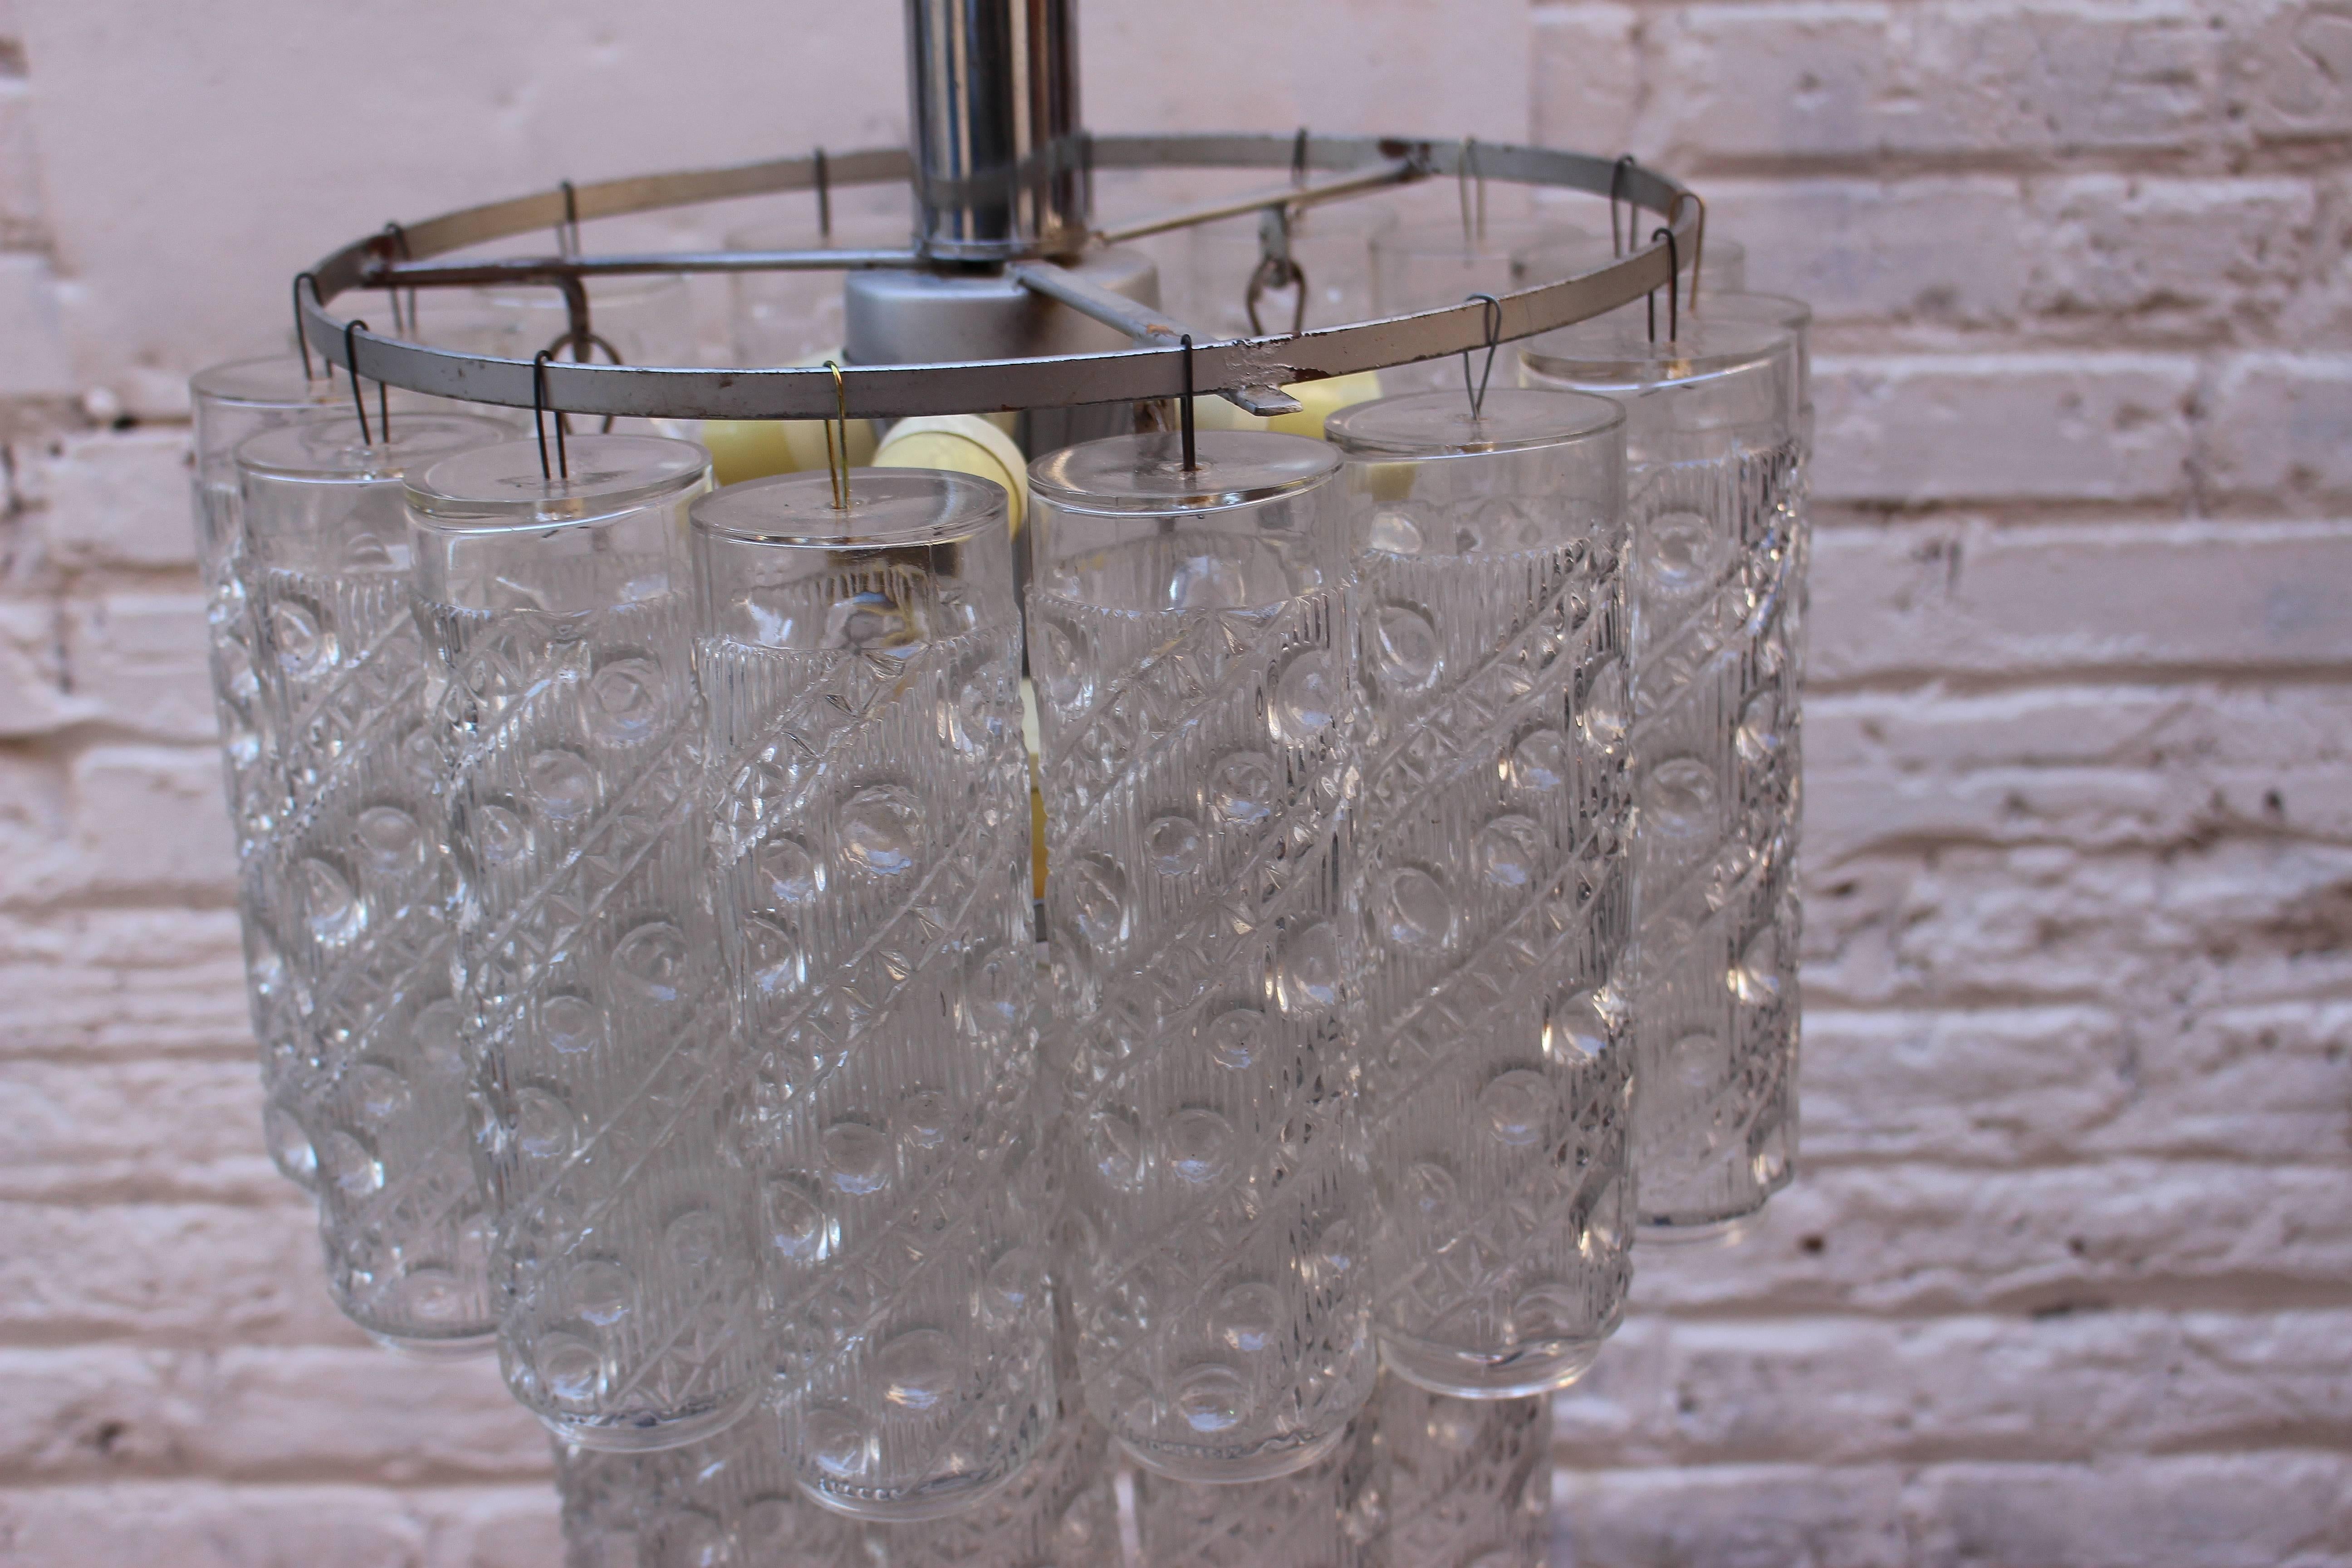 Tubular glass chandelier. 
Fixtures net is 22 inches without the chain.